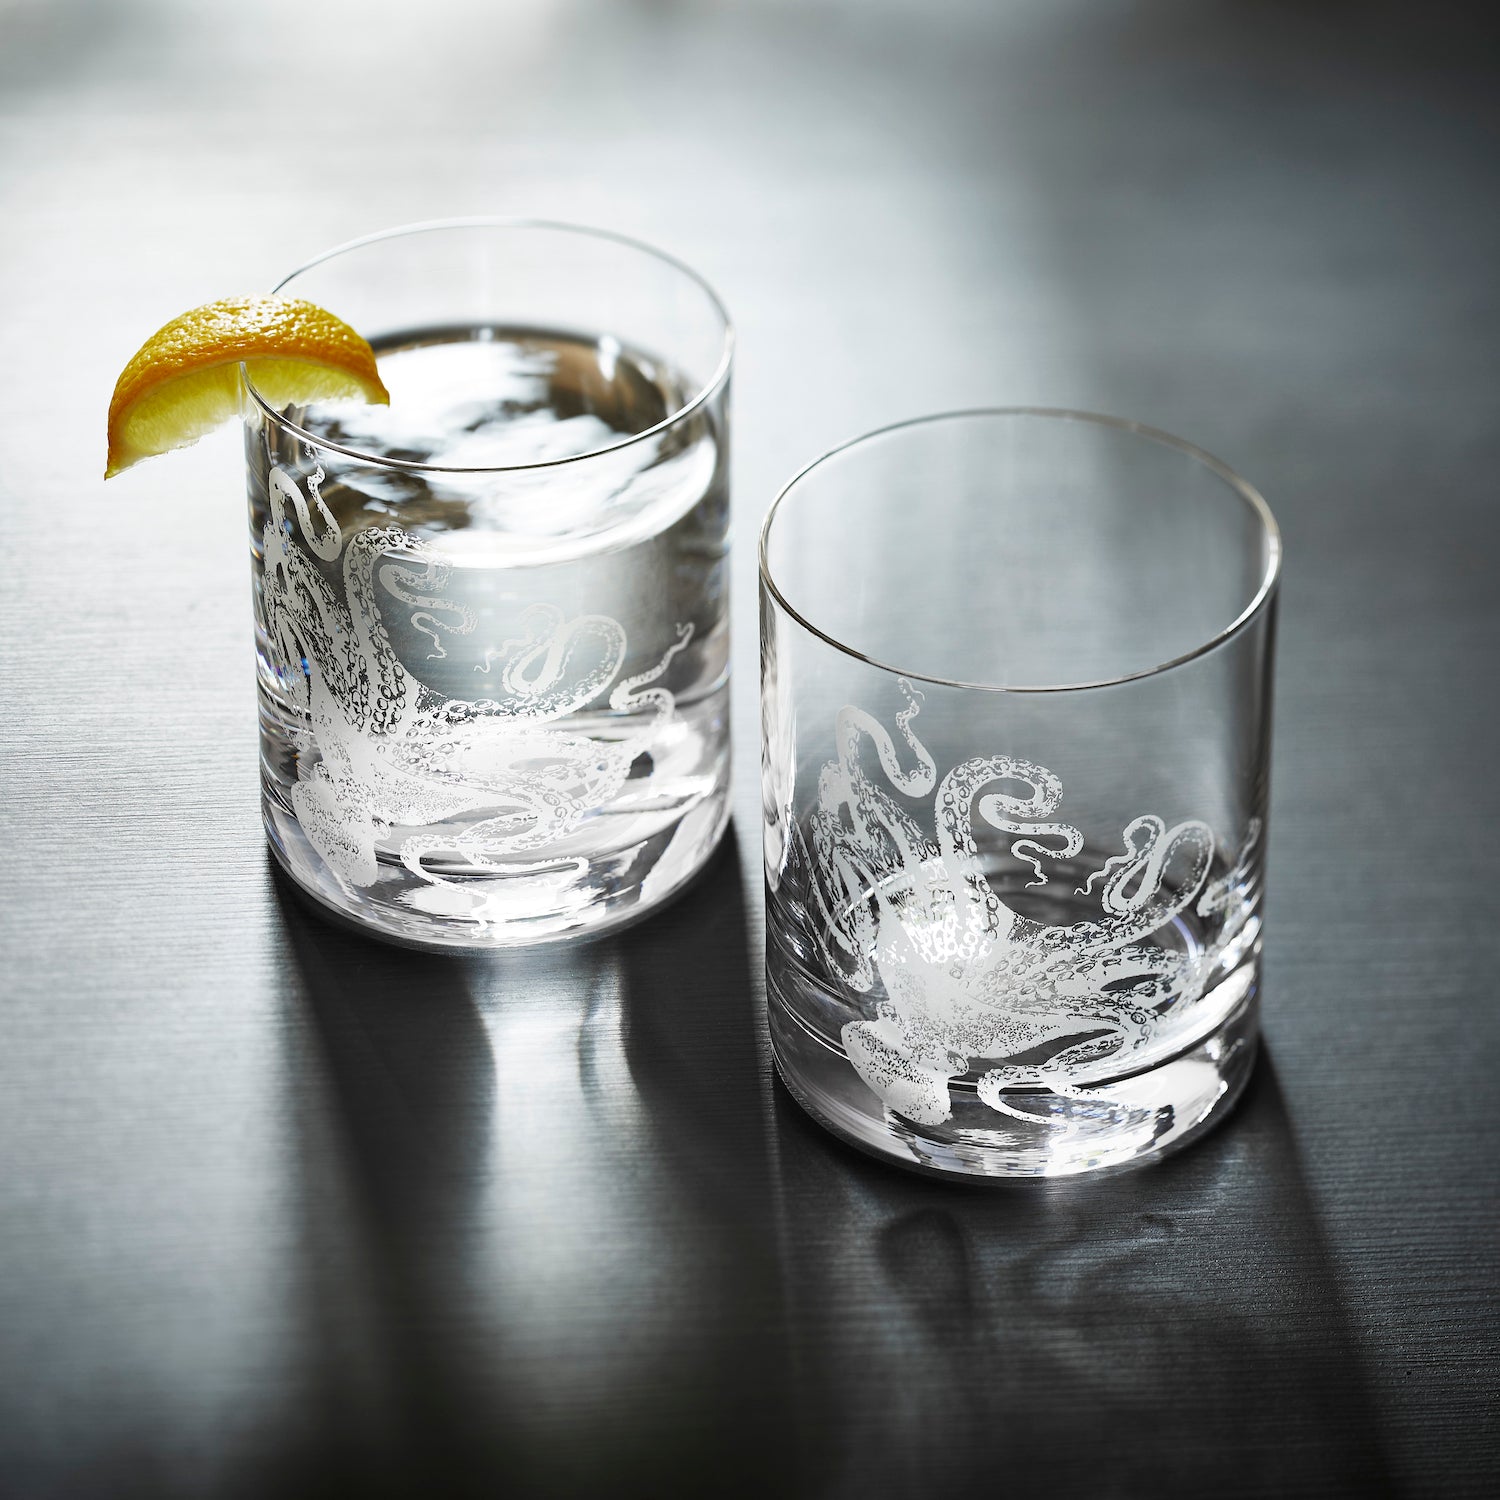 Two Lucy Rocks Glasses, crafted from exquisite crystal glassware by Caskata Artisanal Home, feature intricate octopus designs created using the sand-etching technique. Placed side by side, they merge elegance with a touch of marine mystique.